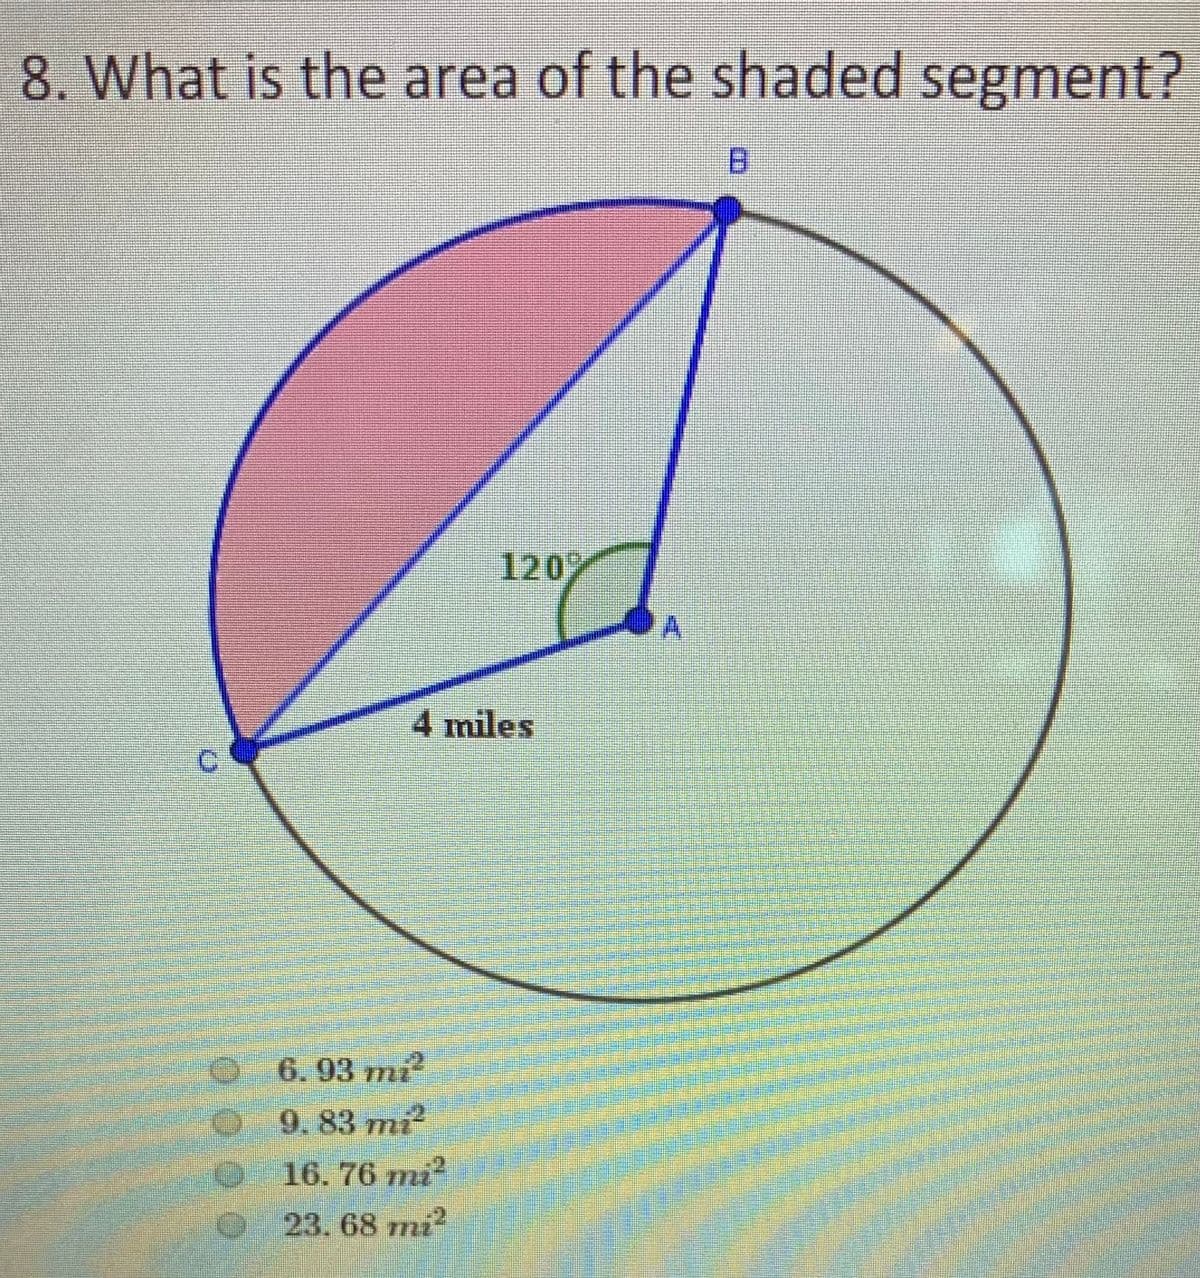 8. What is the area of the shaded segment?
120
4 miles
0 6. 93 mí
9. 83 mi
16. 76 mi?
23.68 mi?
